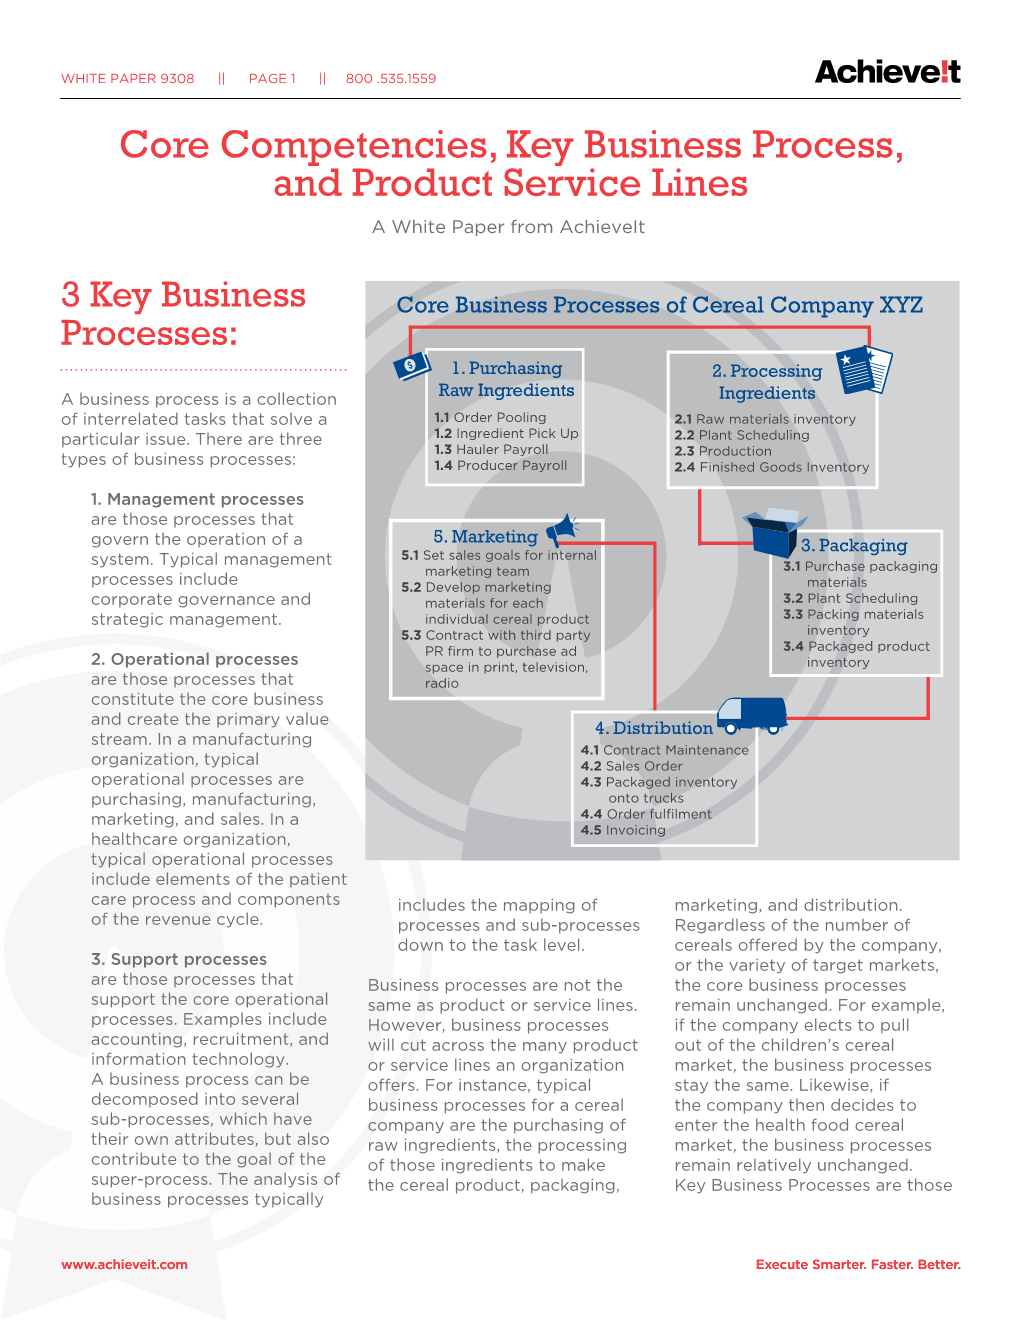 Core Competencies, Key Business Process, and Product Service Lines a White Paper from Achieveit